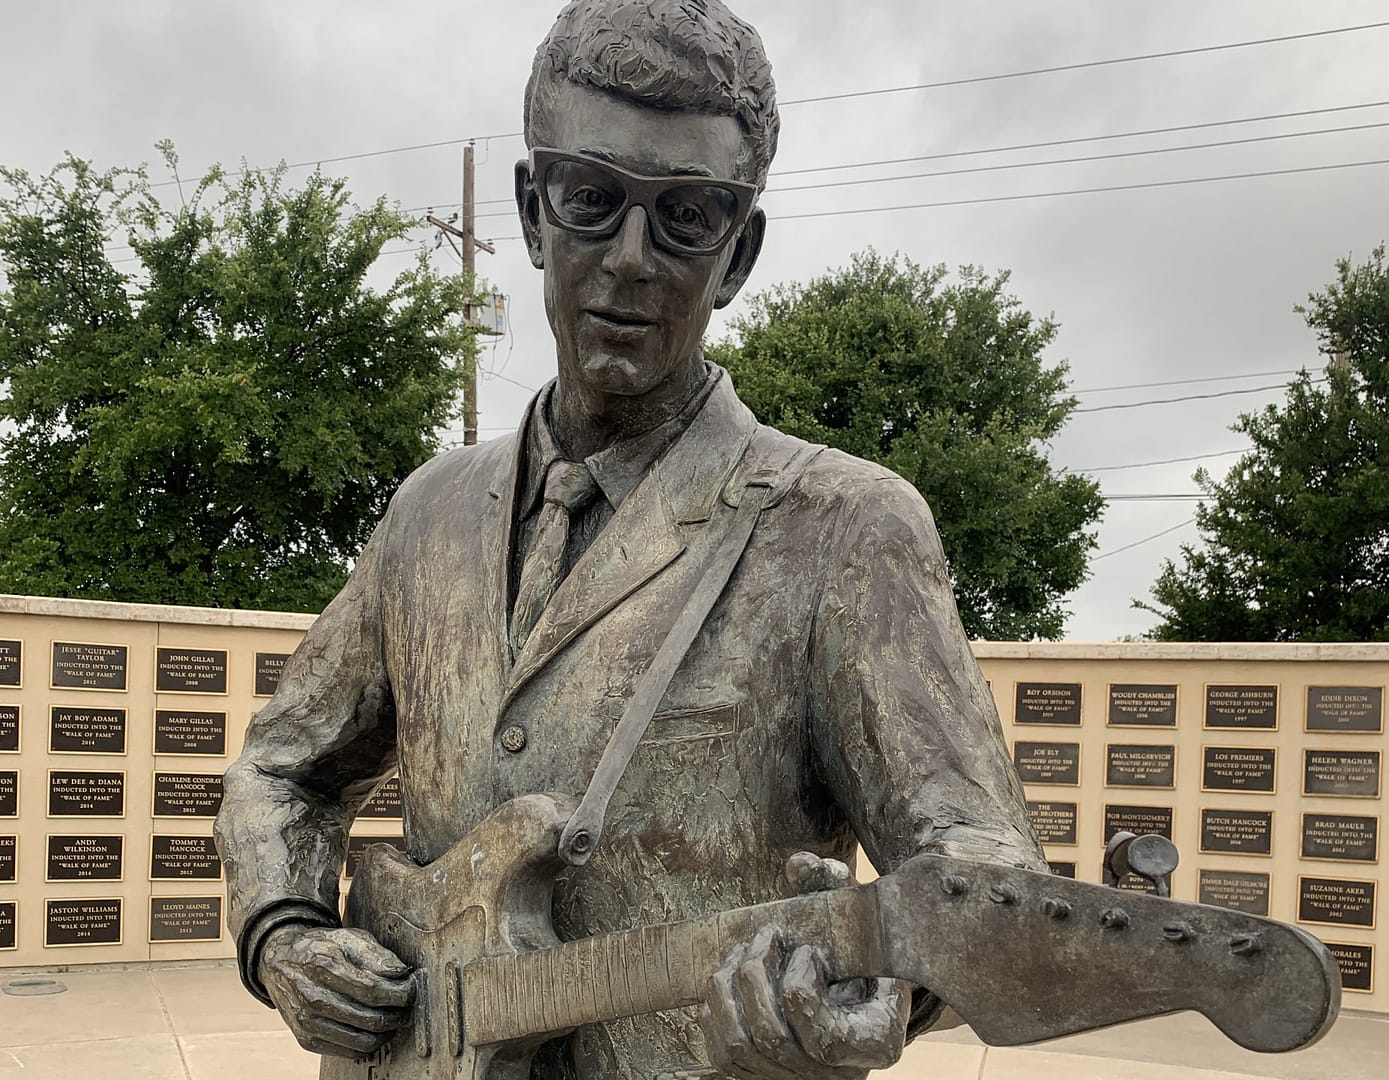 The Buddy Holly statue in Lubbock, Texas